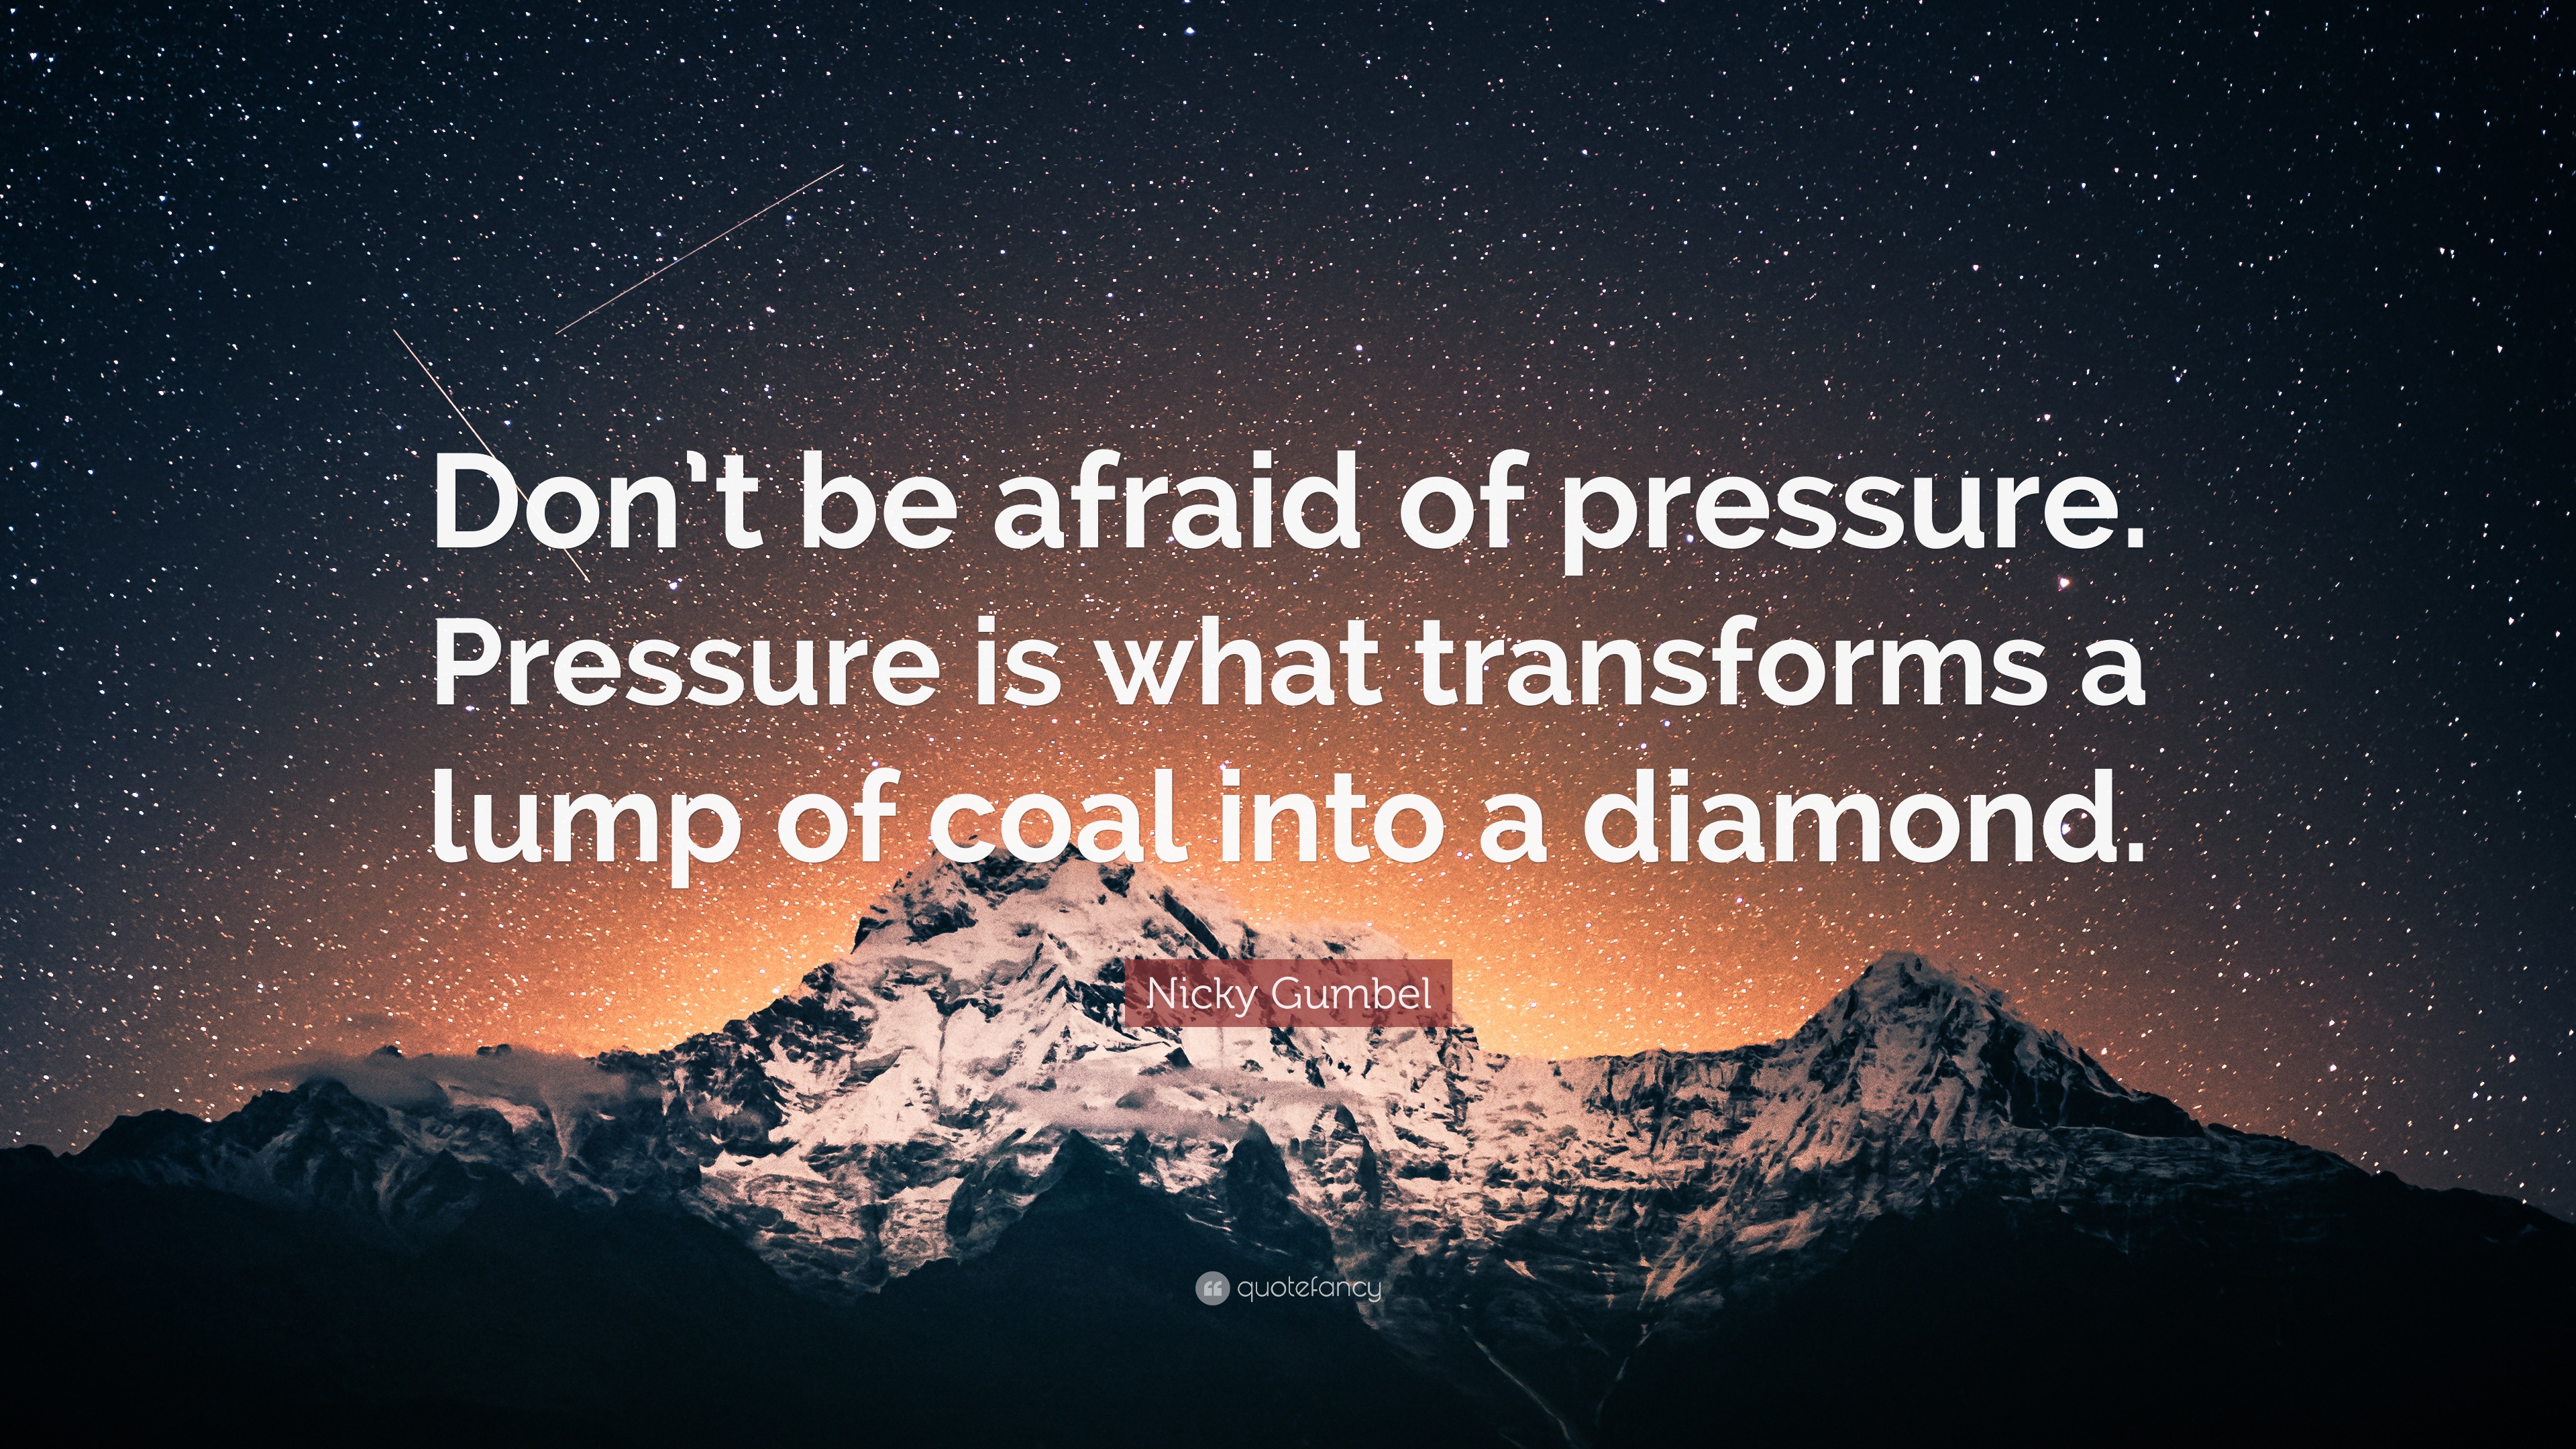 Nicky Gumbel Quote: “Don't Be Afraid Of Pressure. Pressure Is What Transforms A Lump Of